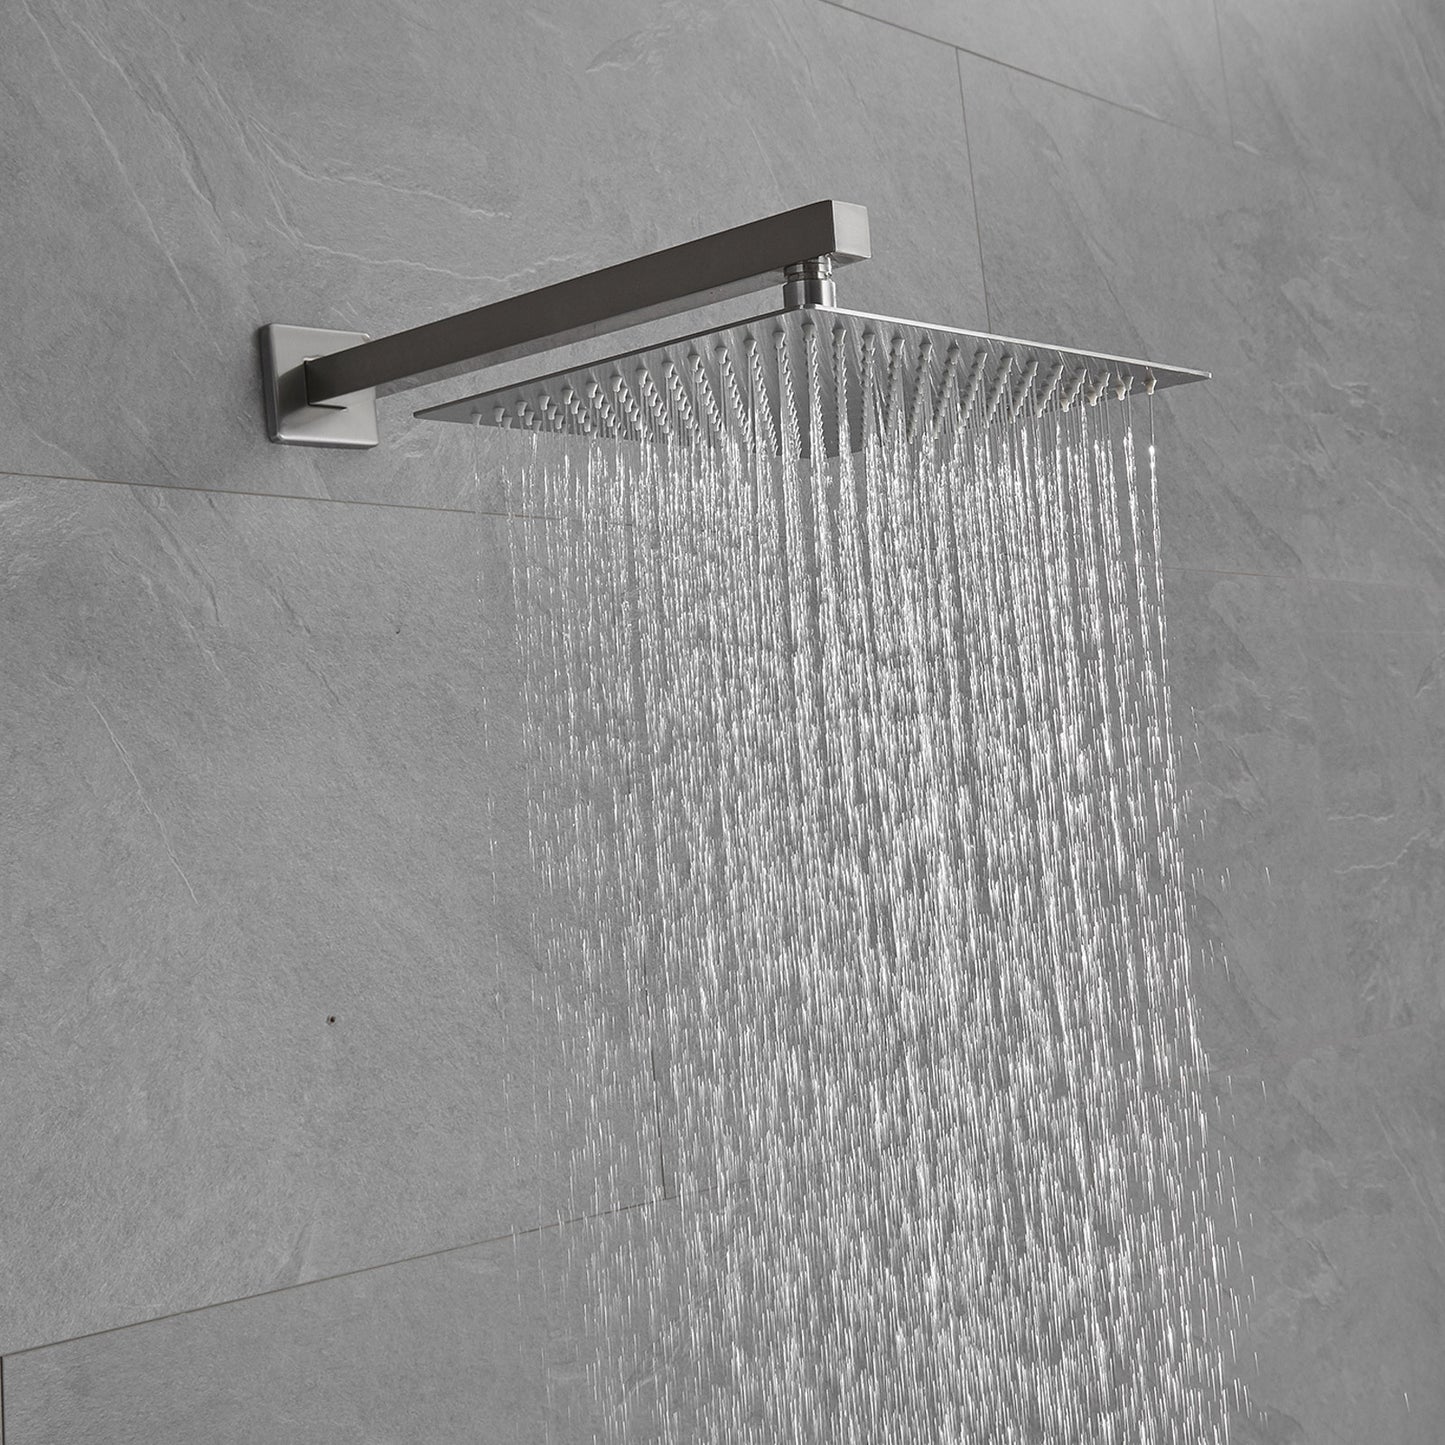 Full Coverage 2-Handle Brushed Nickel Shower System with Handheld Shower Kit